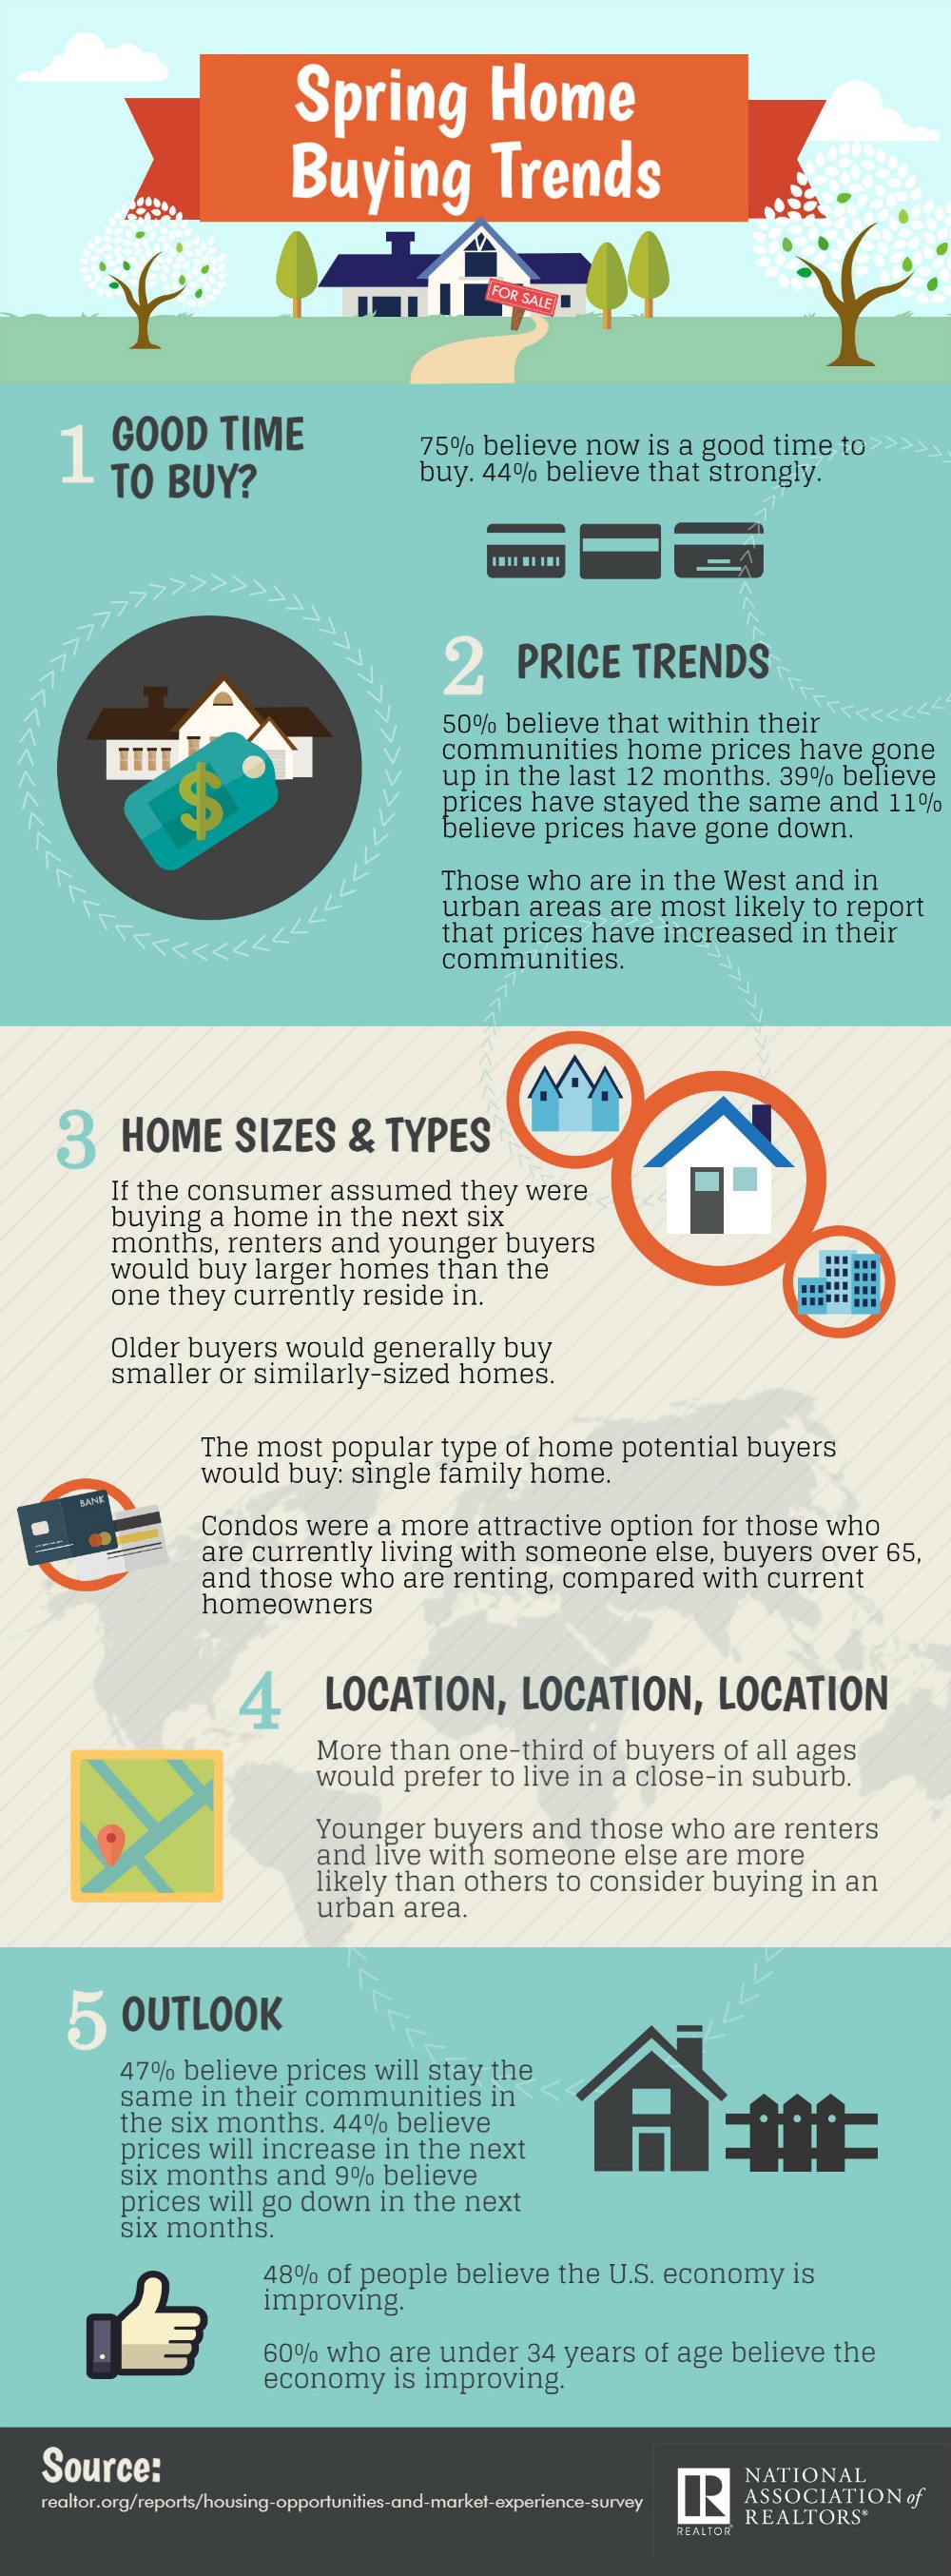 2016-spring-home-buying-trends-infographic-03-28-2016-full